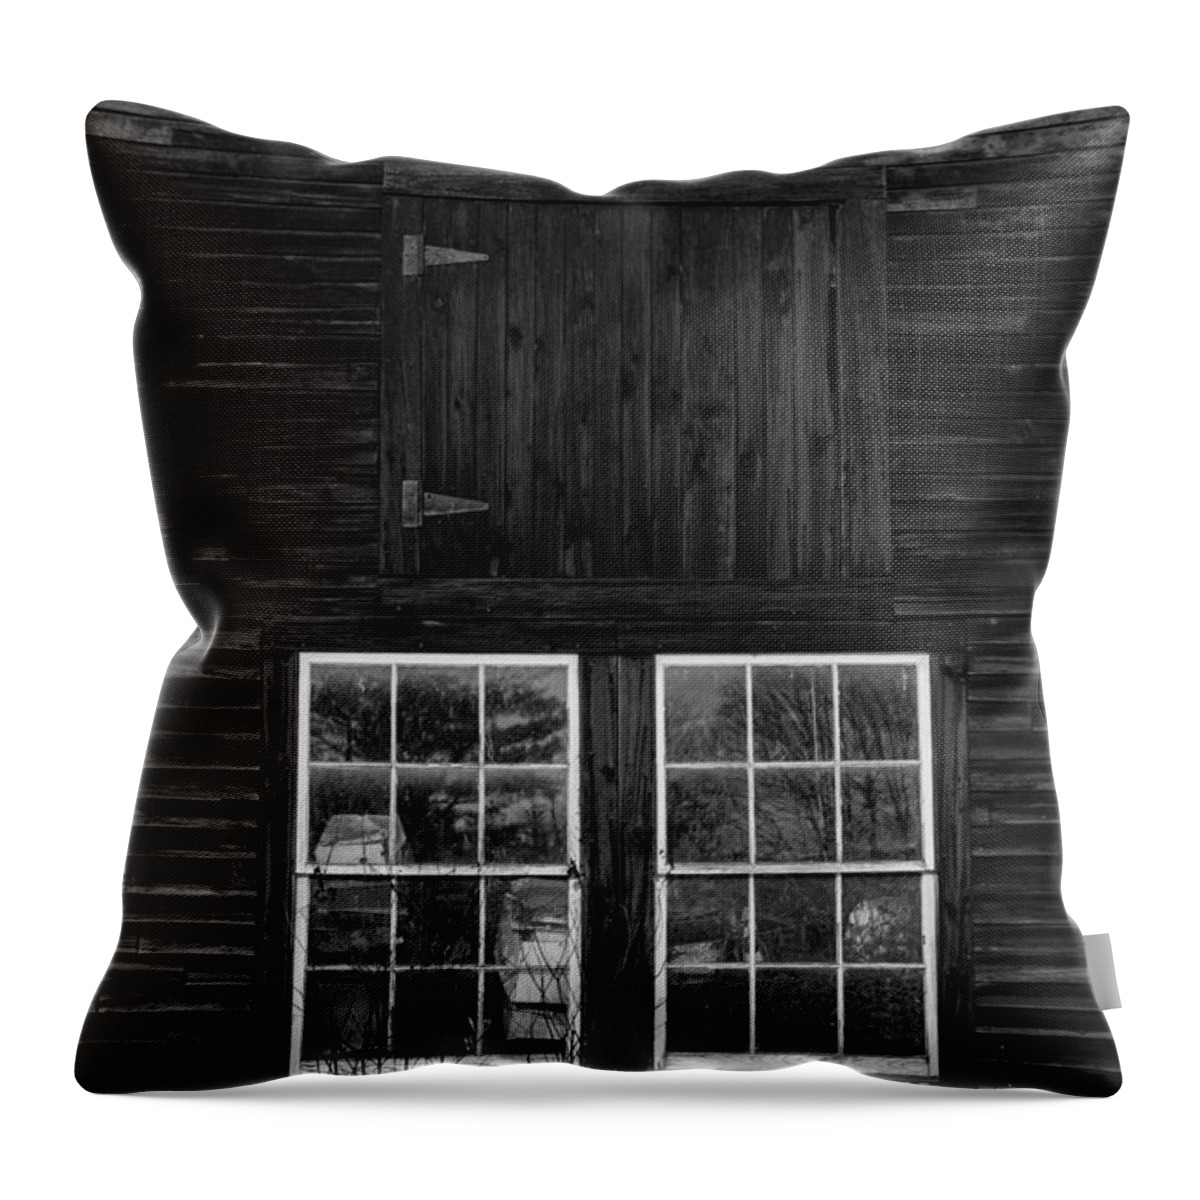 Barn Throw Pillow featuring the photograph Old Barn Windows by Edward Fielding